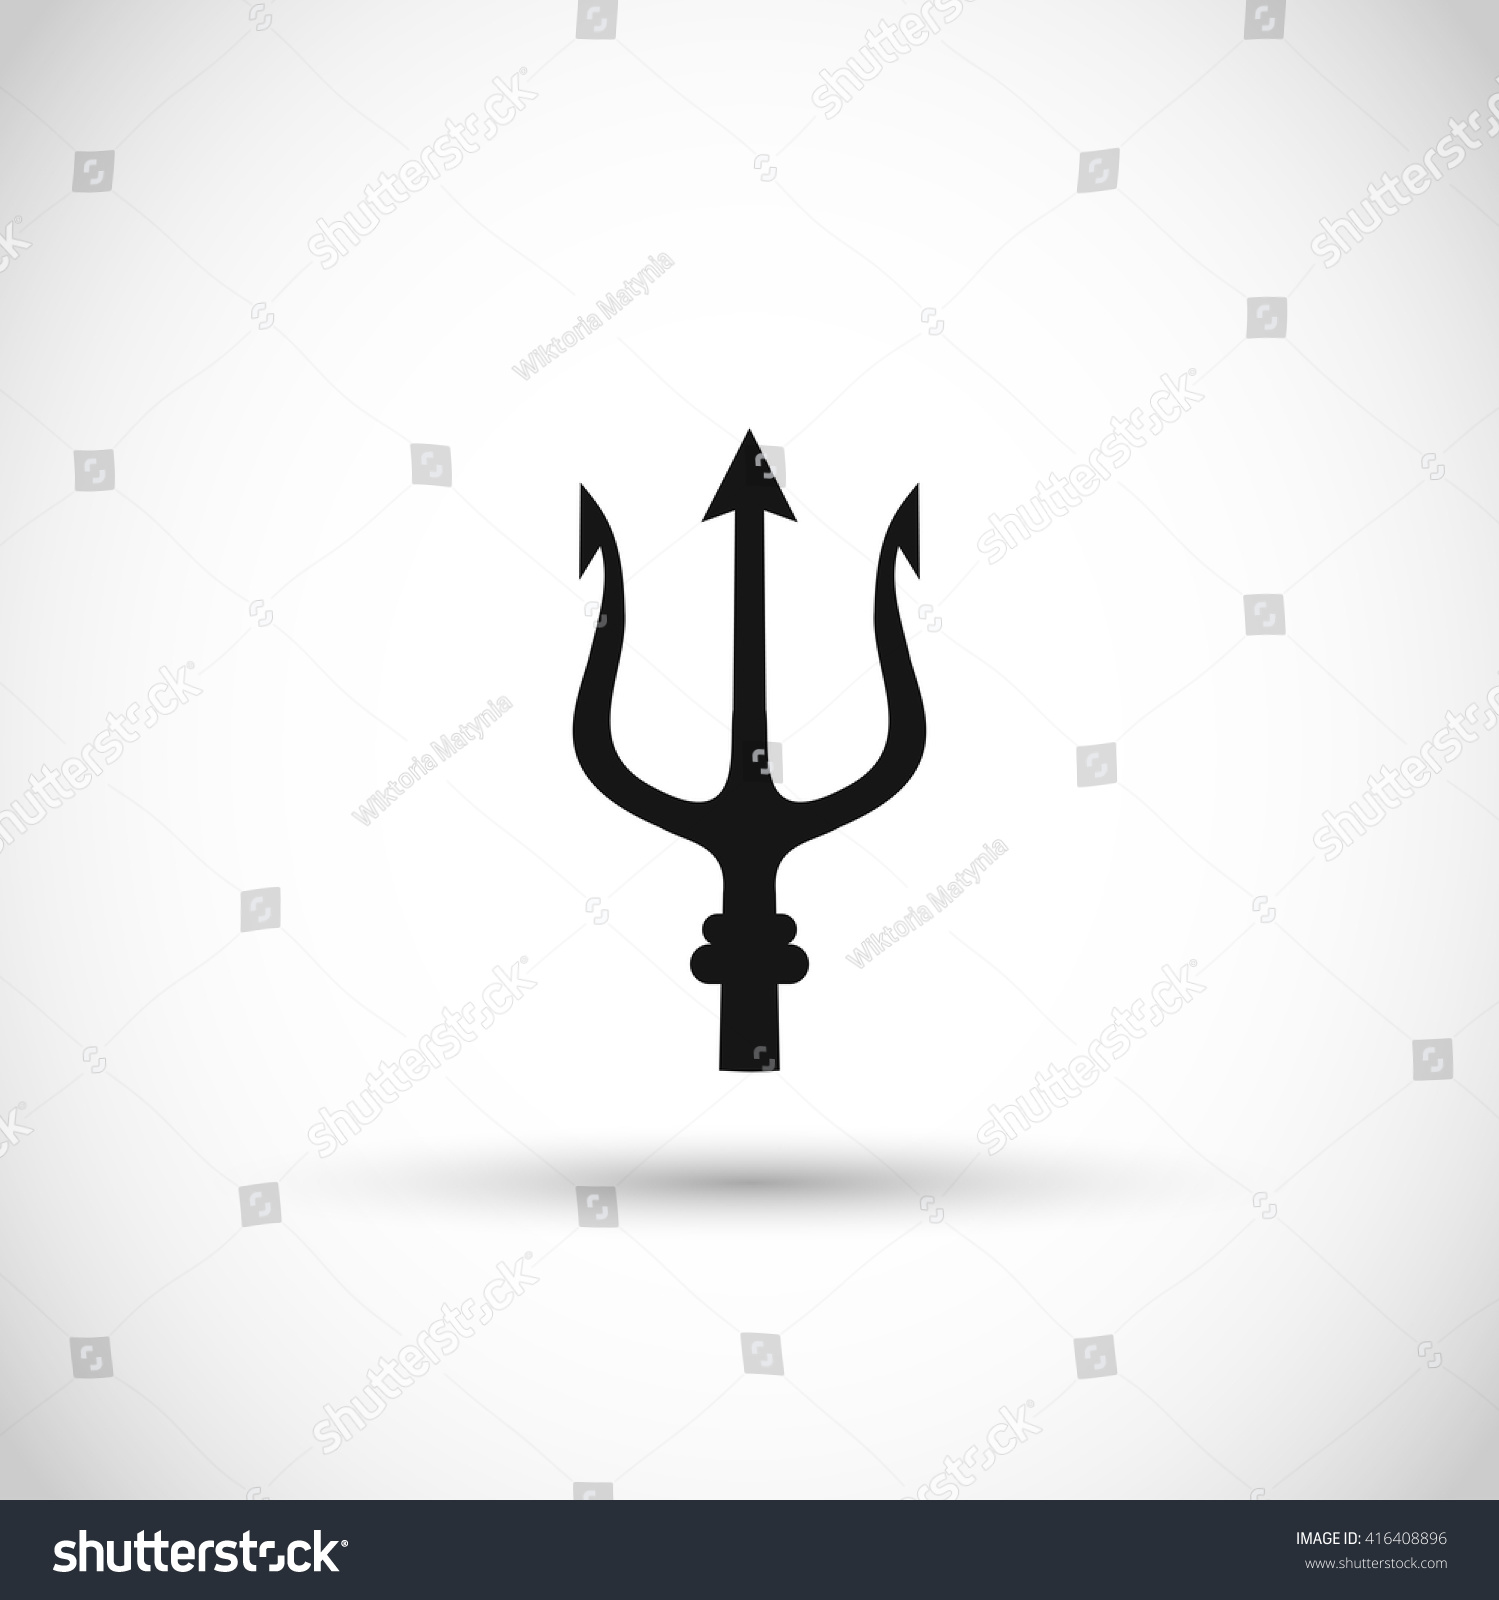 Trident Icon Vector Stock Vector (Royalty Free) 416408896 | Shutterstock